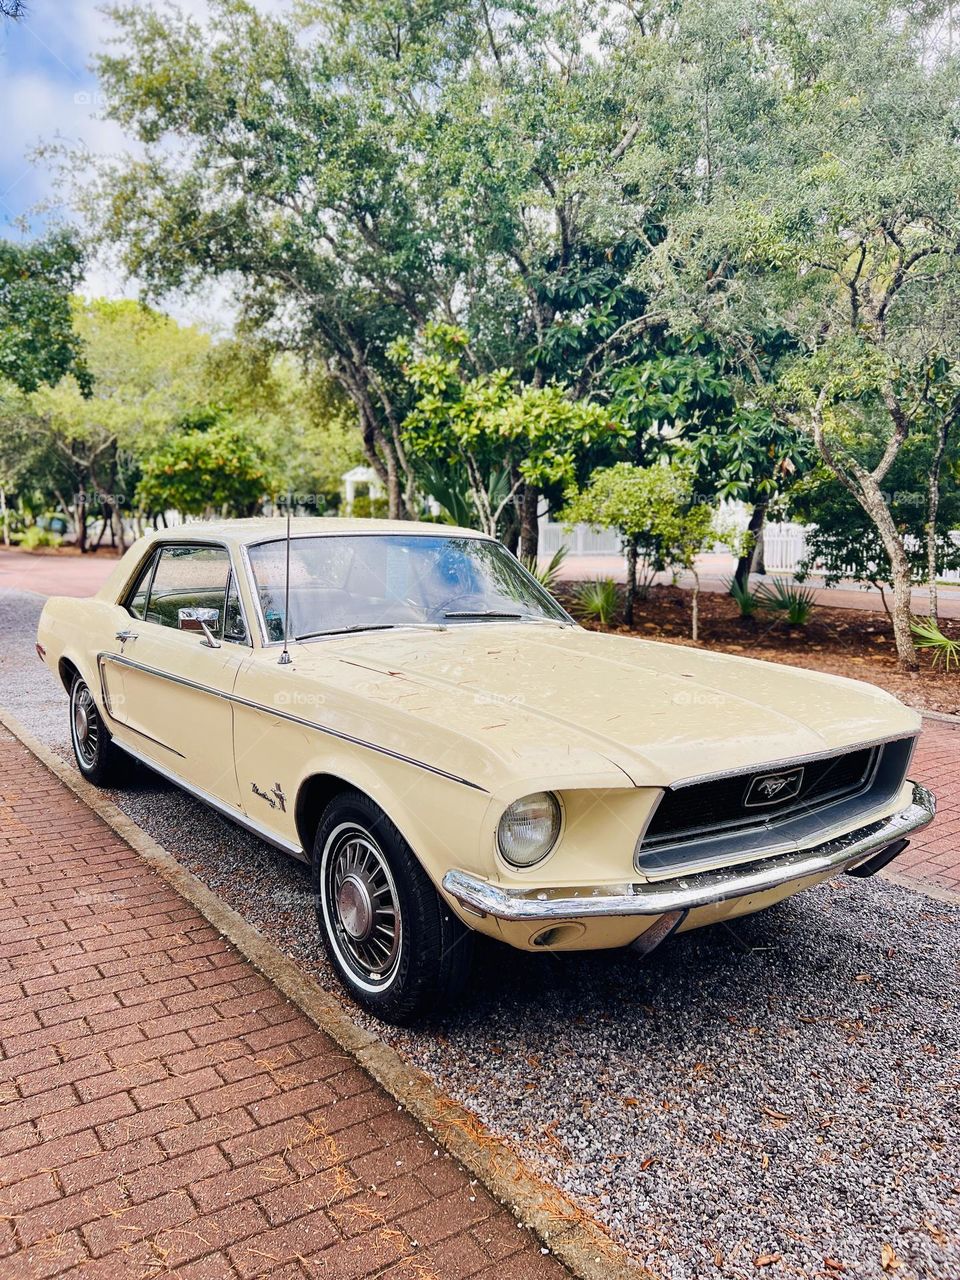 Classic yellow mustang at three-quarter view parked alongside brick sidewalk. The day is sunny and green trees in background 